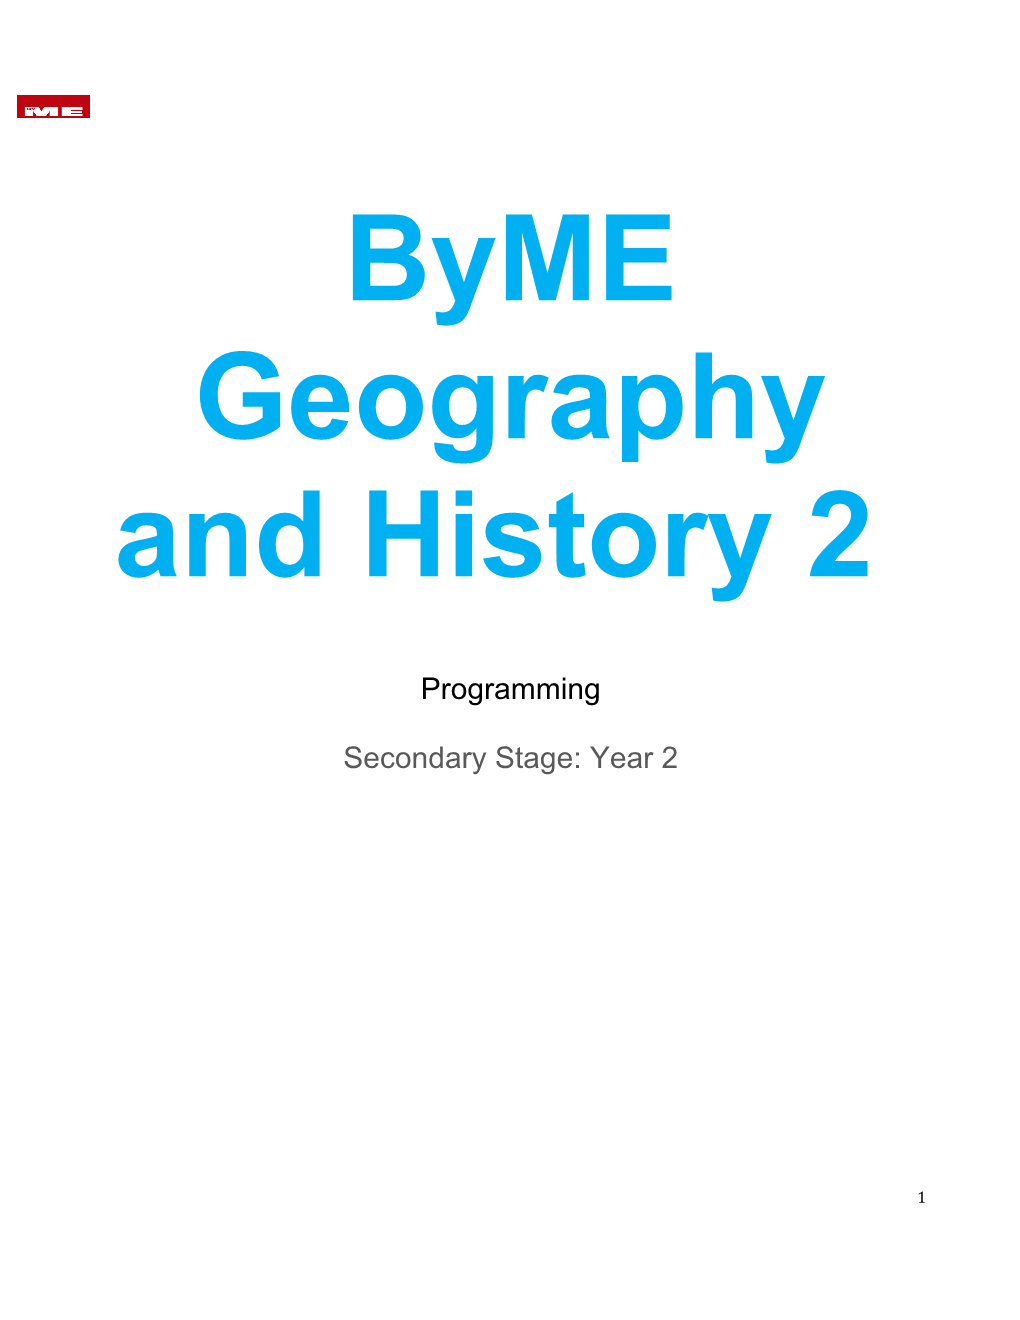 Byme Geography and History2